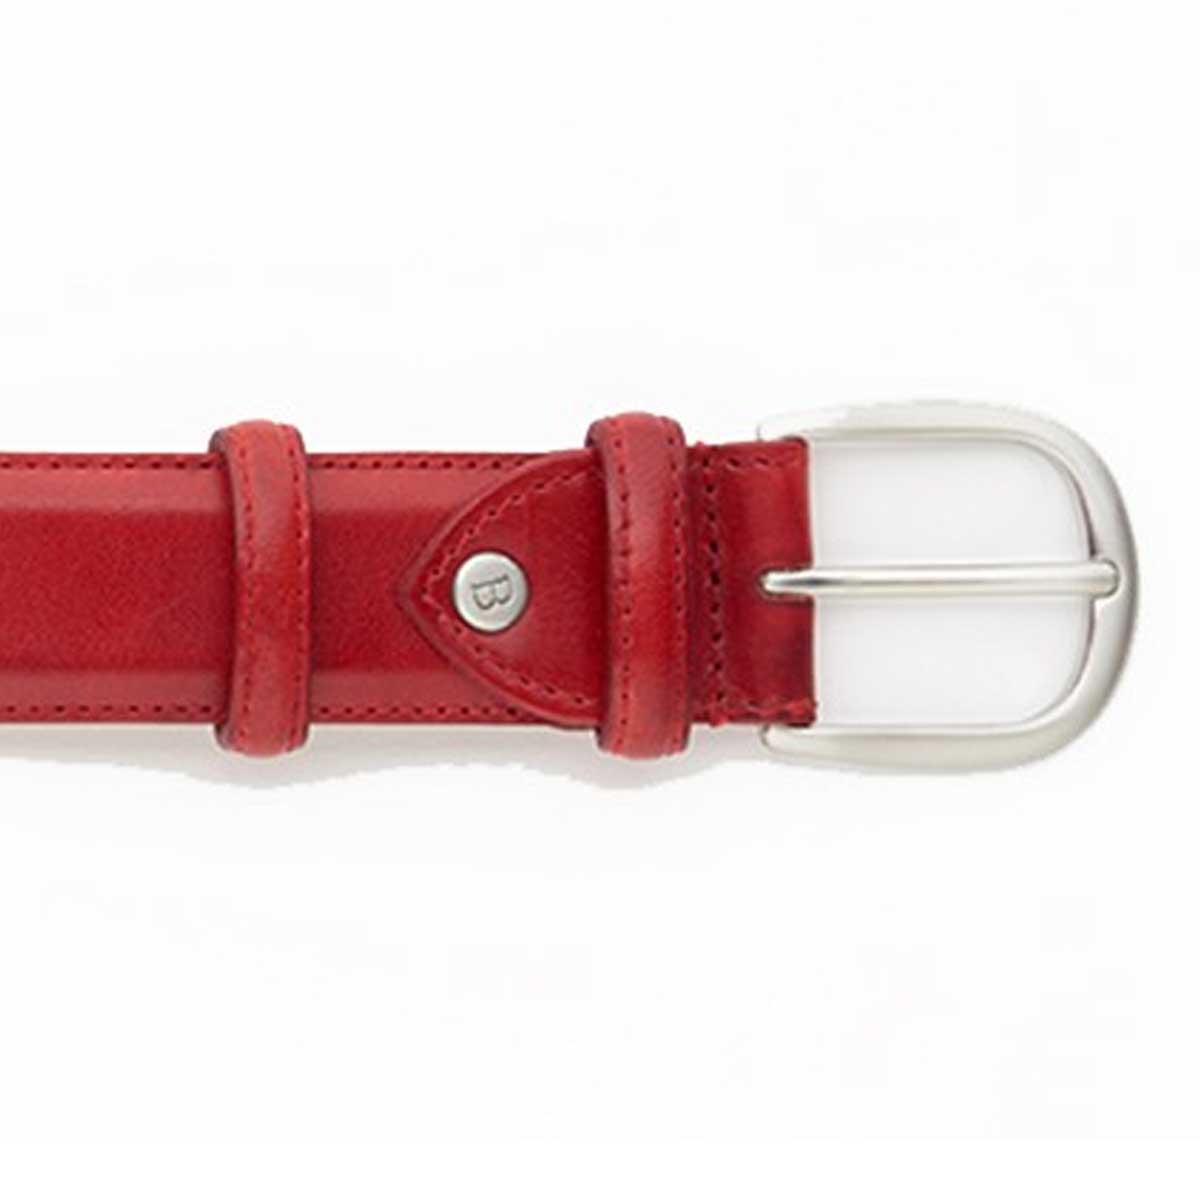 Barker Leather Plain Belt - Red Hand Painted